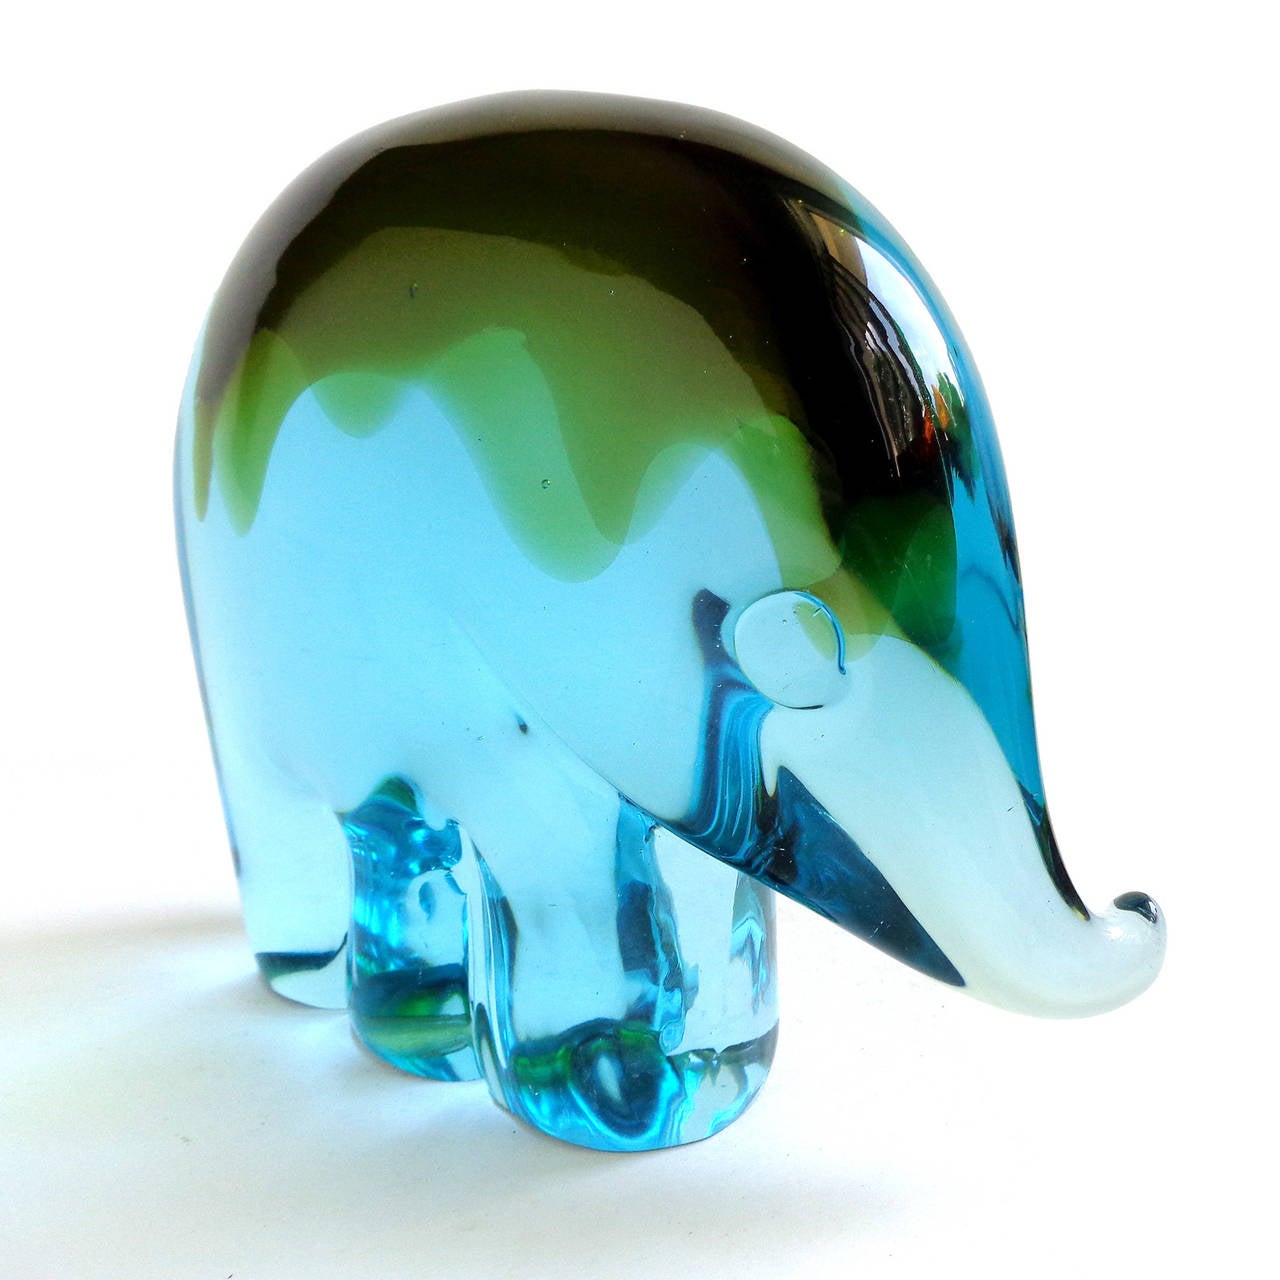 Free shipping worldwide! See details below description.

Large Murano hand blown blue and green Sommerso art glass elephant sculpture. Documented to designer Luciano Gaspari for the Salviati company. This cute elephant has the original label. See